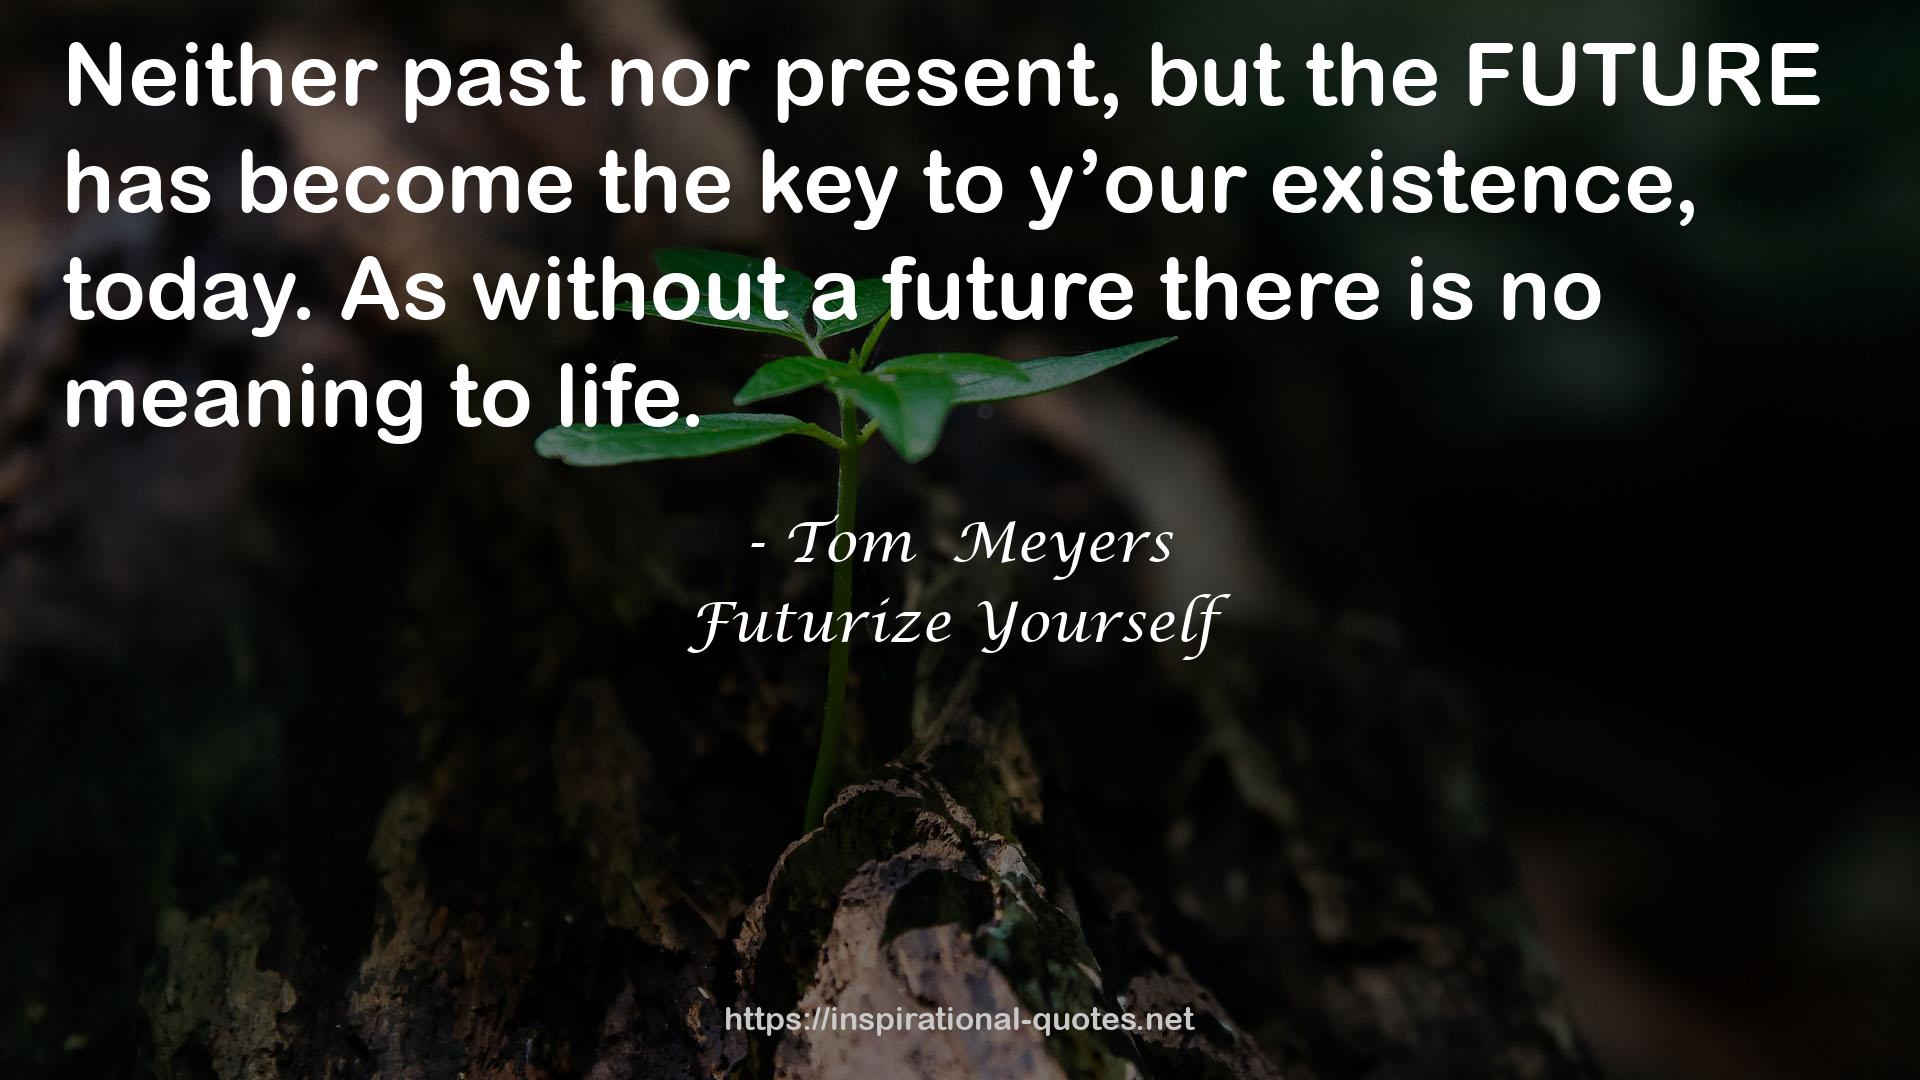 Futurize Yourself QUOTES